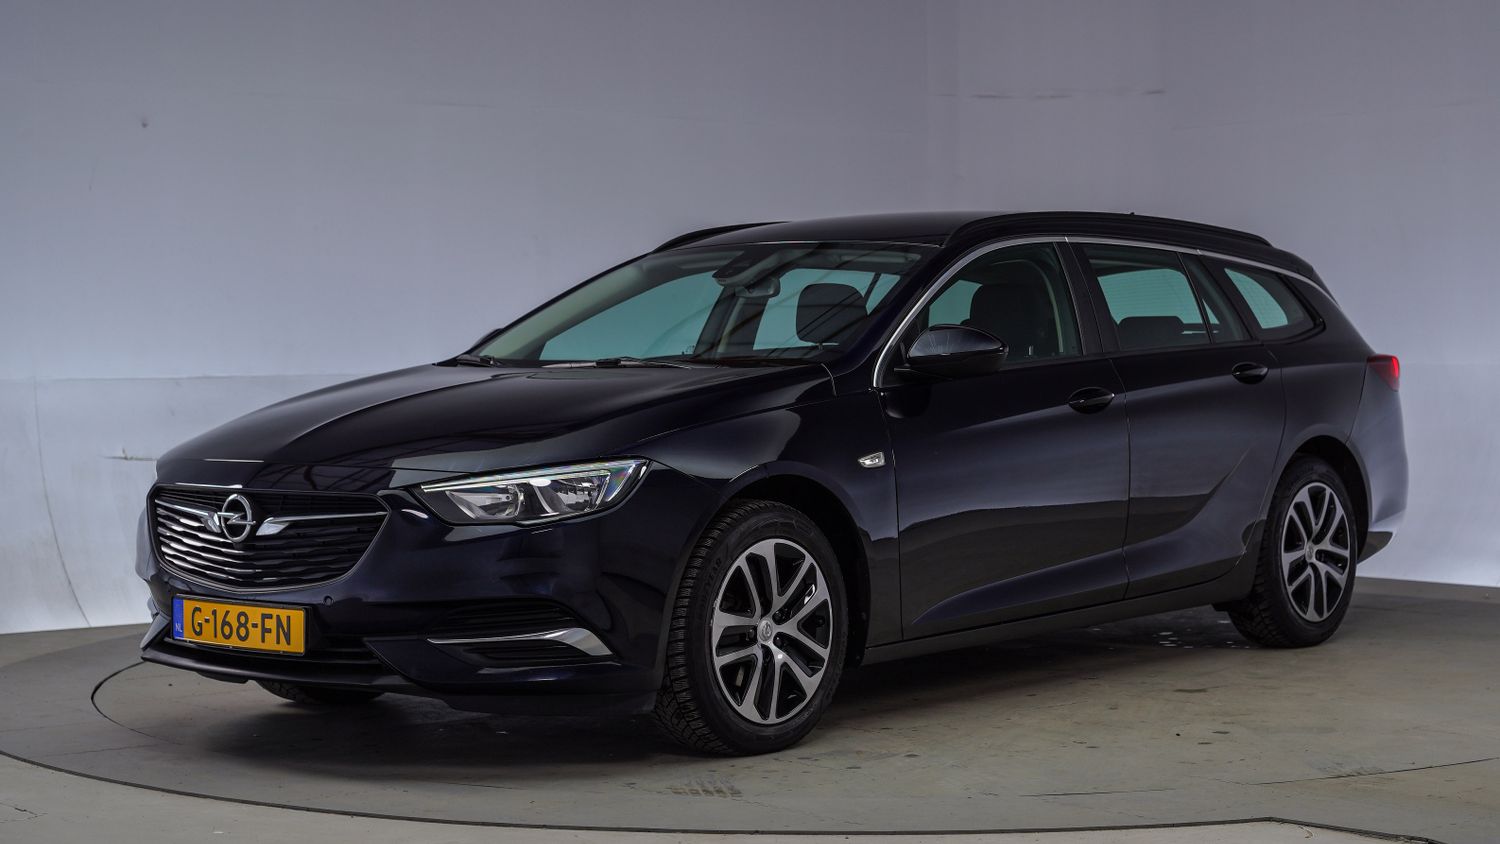 Opel Insignia Station 2019 G-168-FN 1